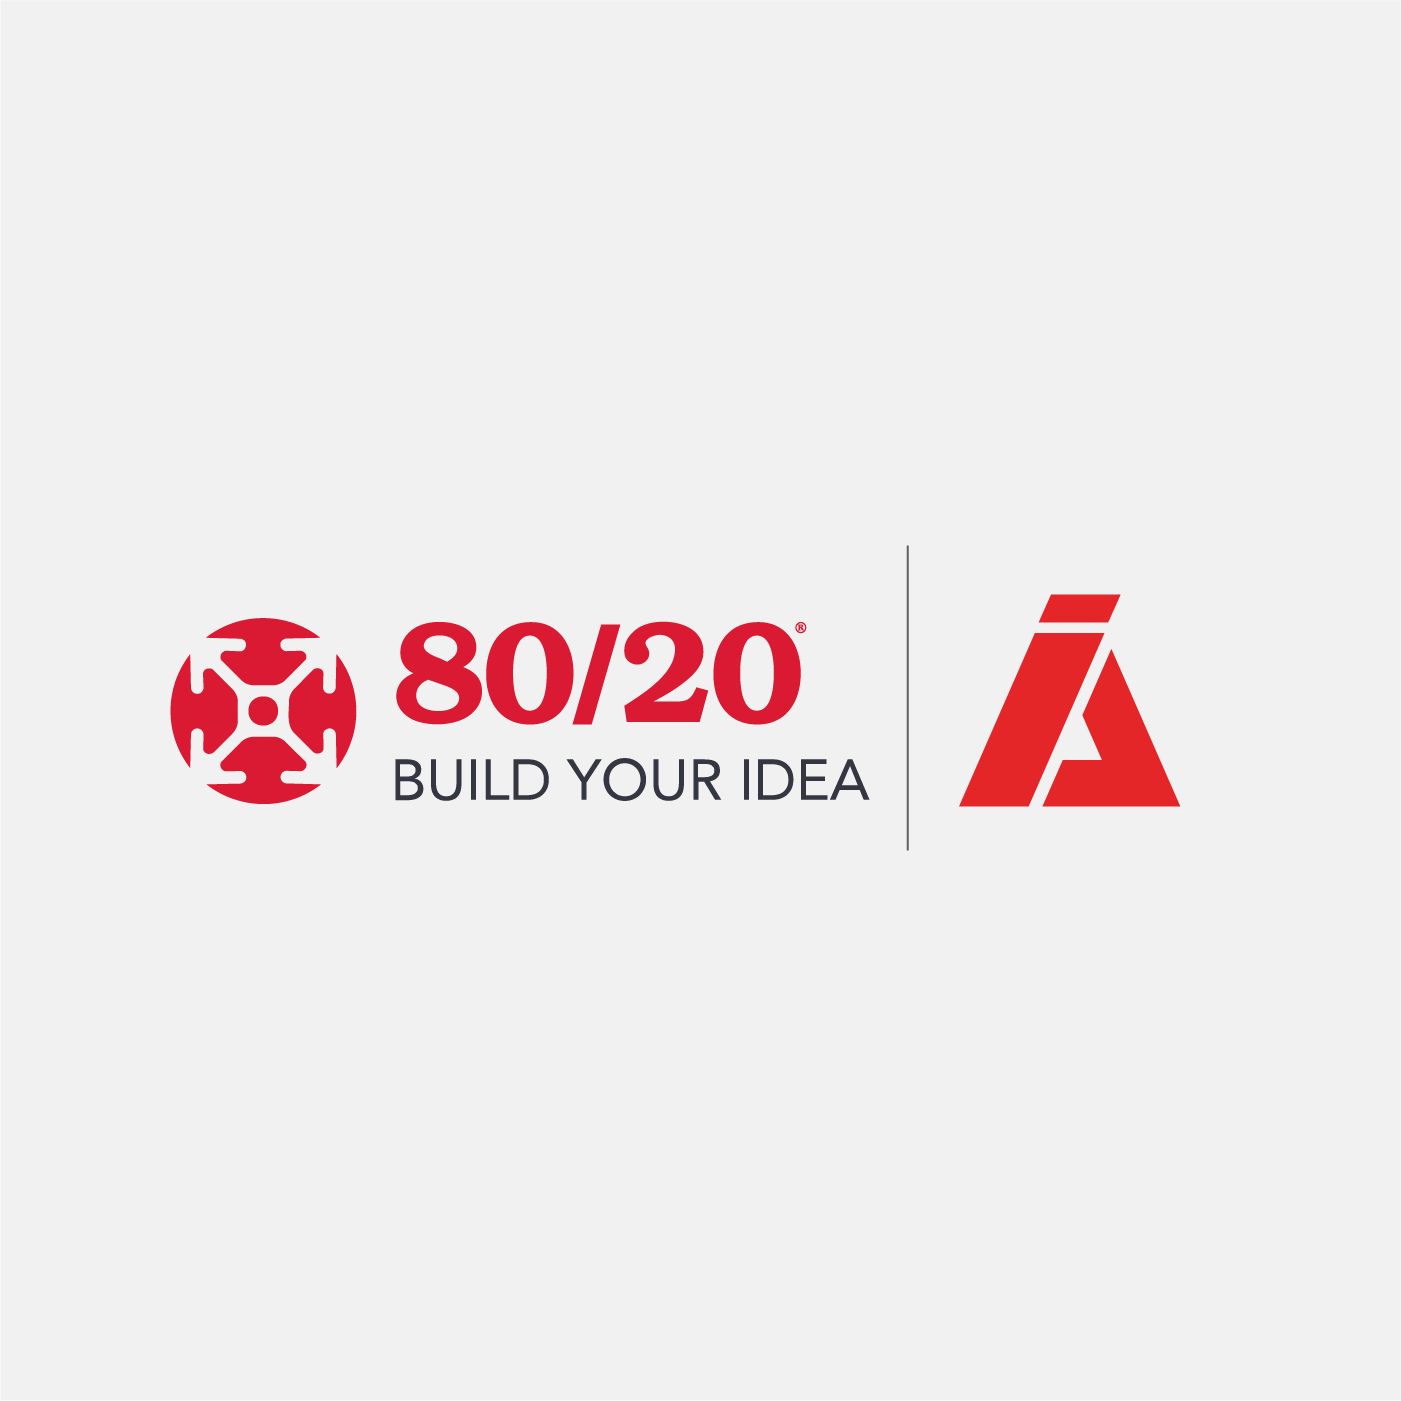 iAutomation Announces Partnership with 80/20